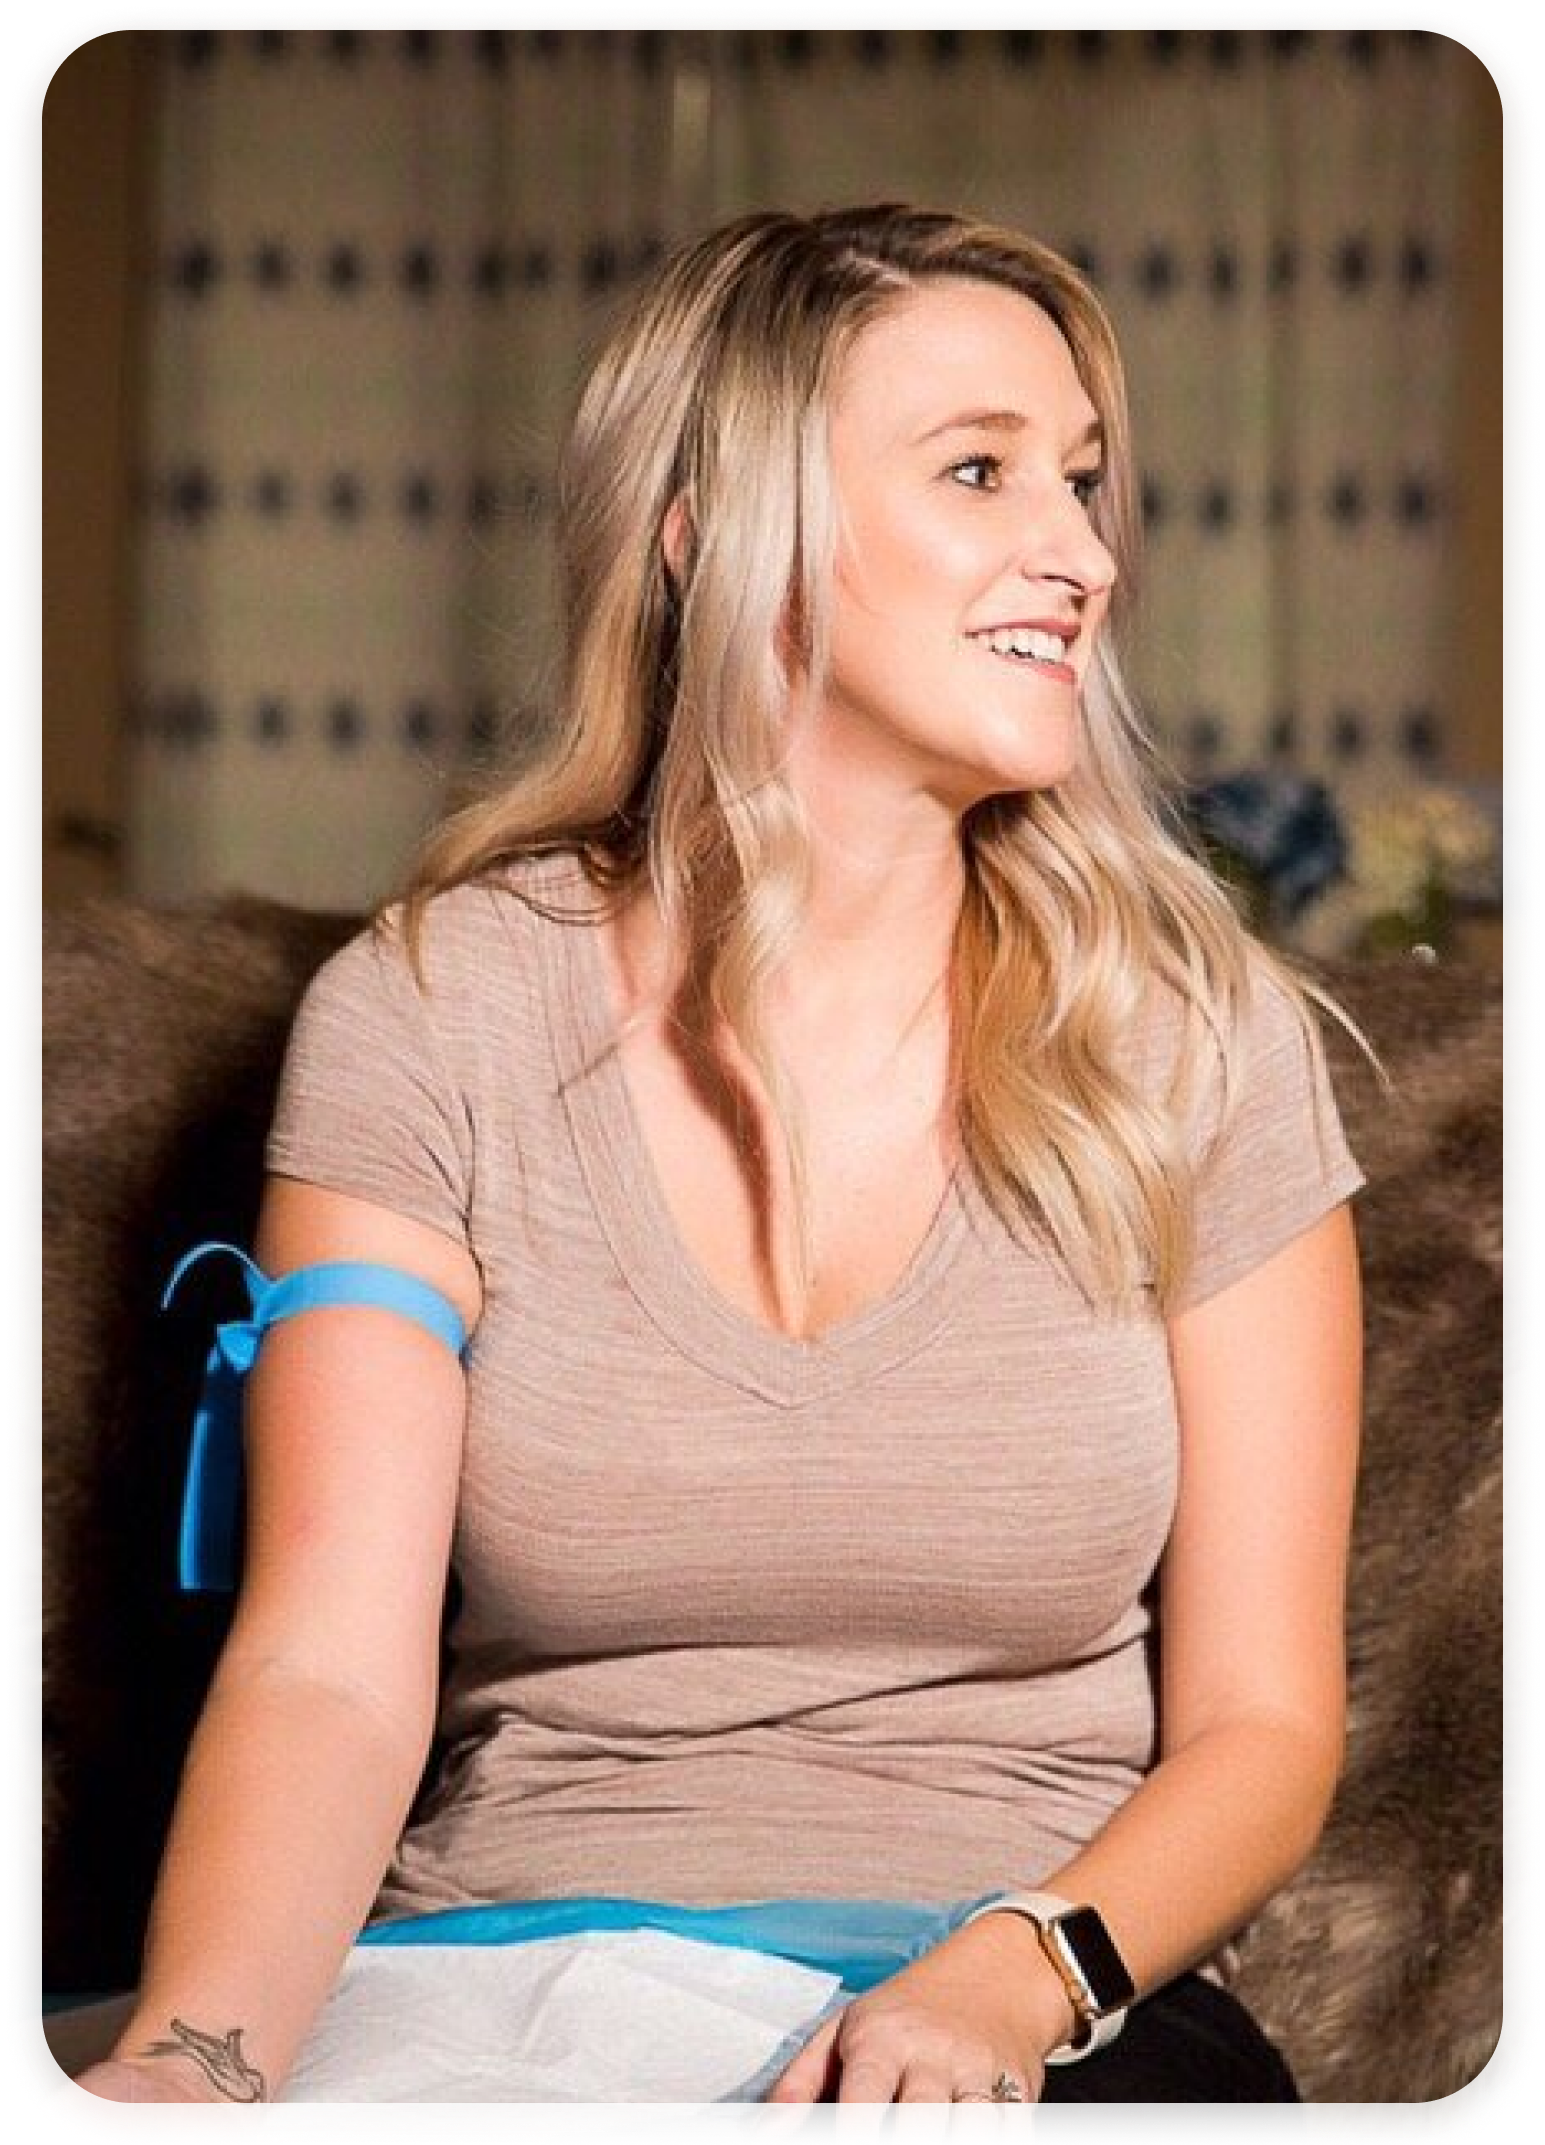 A woman is sitting on a couch with a blue bandage on her arm.